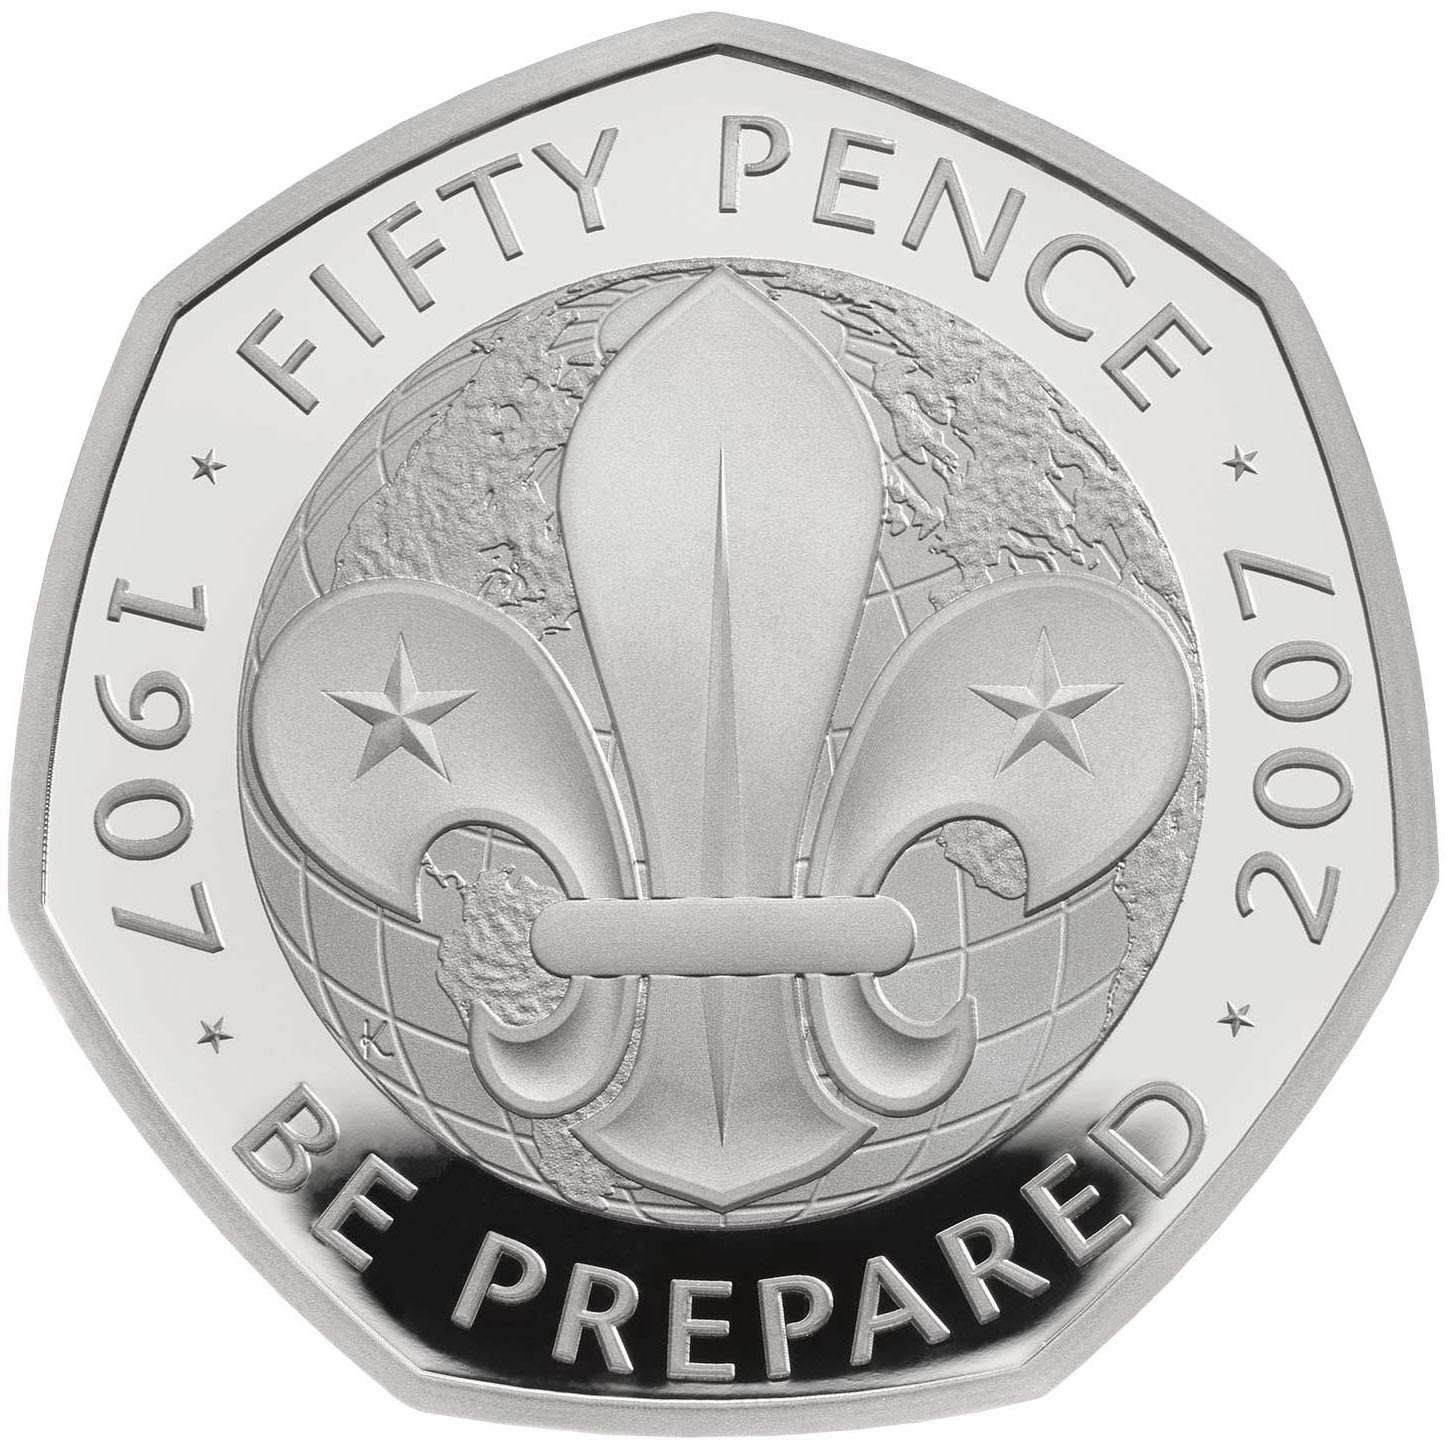 Image of 50 pence coin - Centenary of the Foundation of the Scouting Movement | United Kingdom 2007.  The Copper–Nickel (CuNi) coin is of UNC quality.